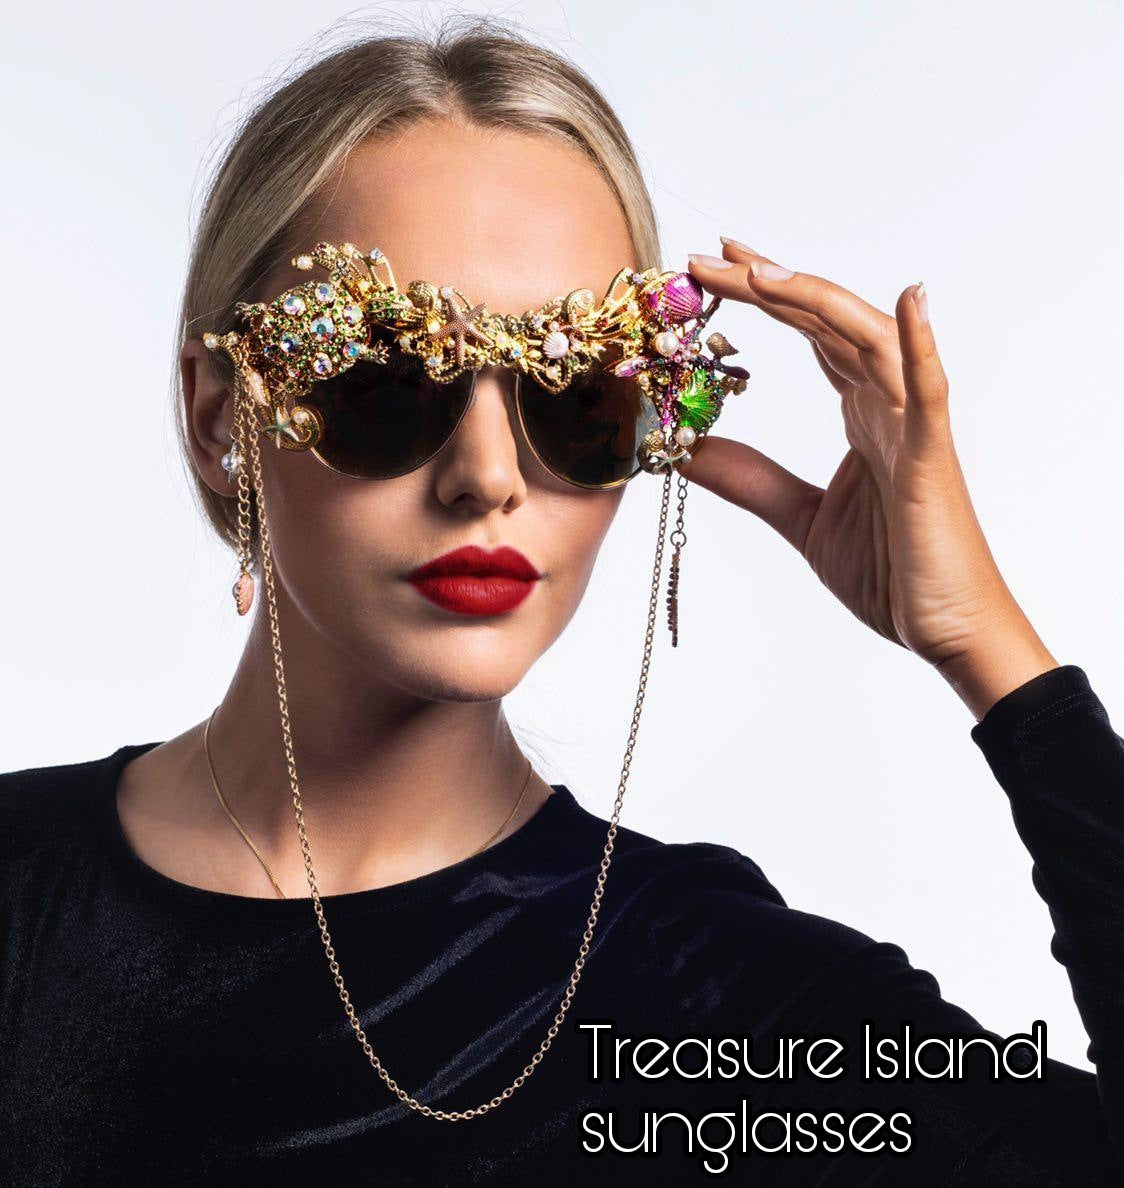 Shifting Depths collection: the Treasure Island sculptural sunglasses